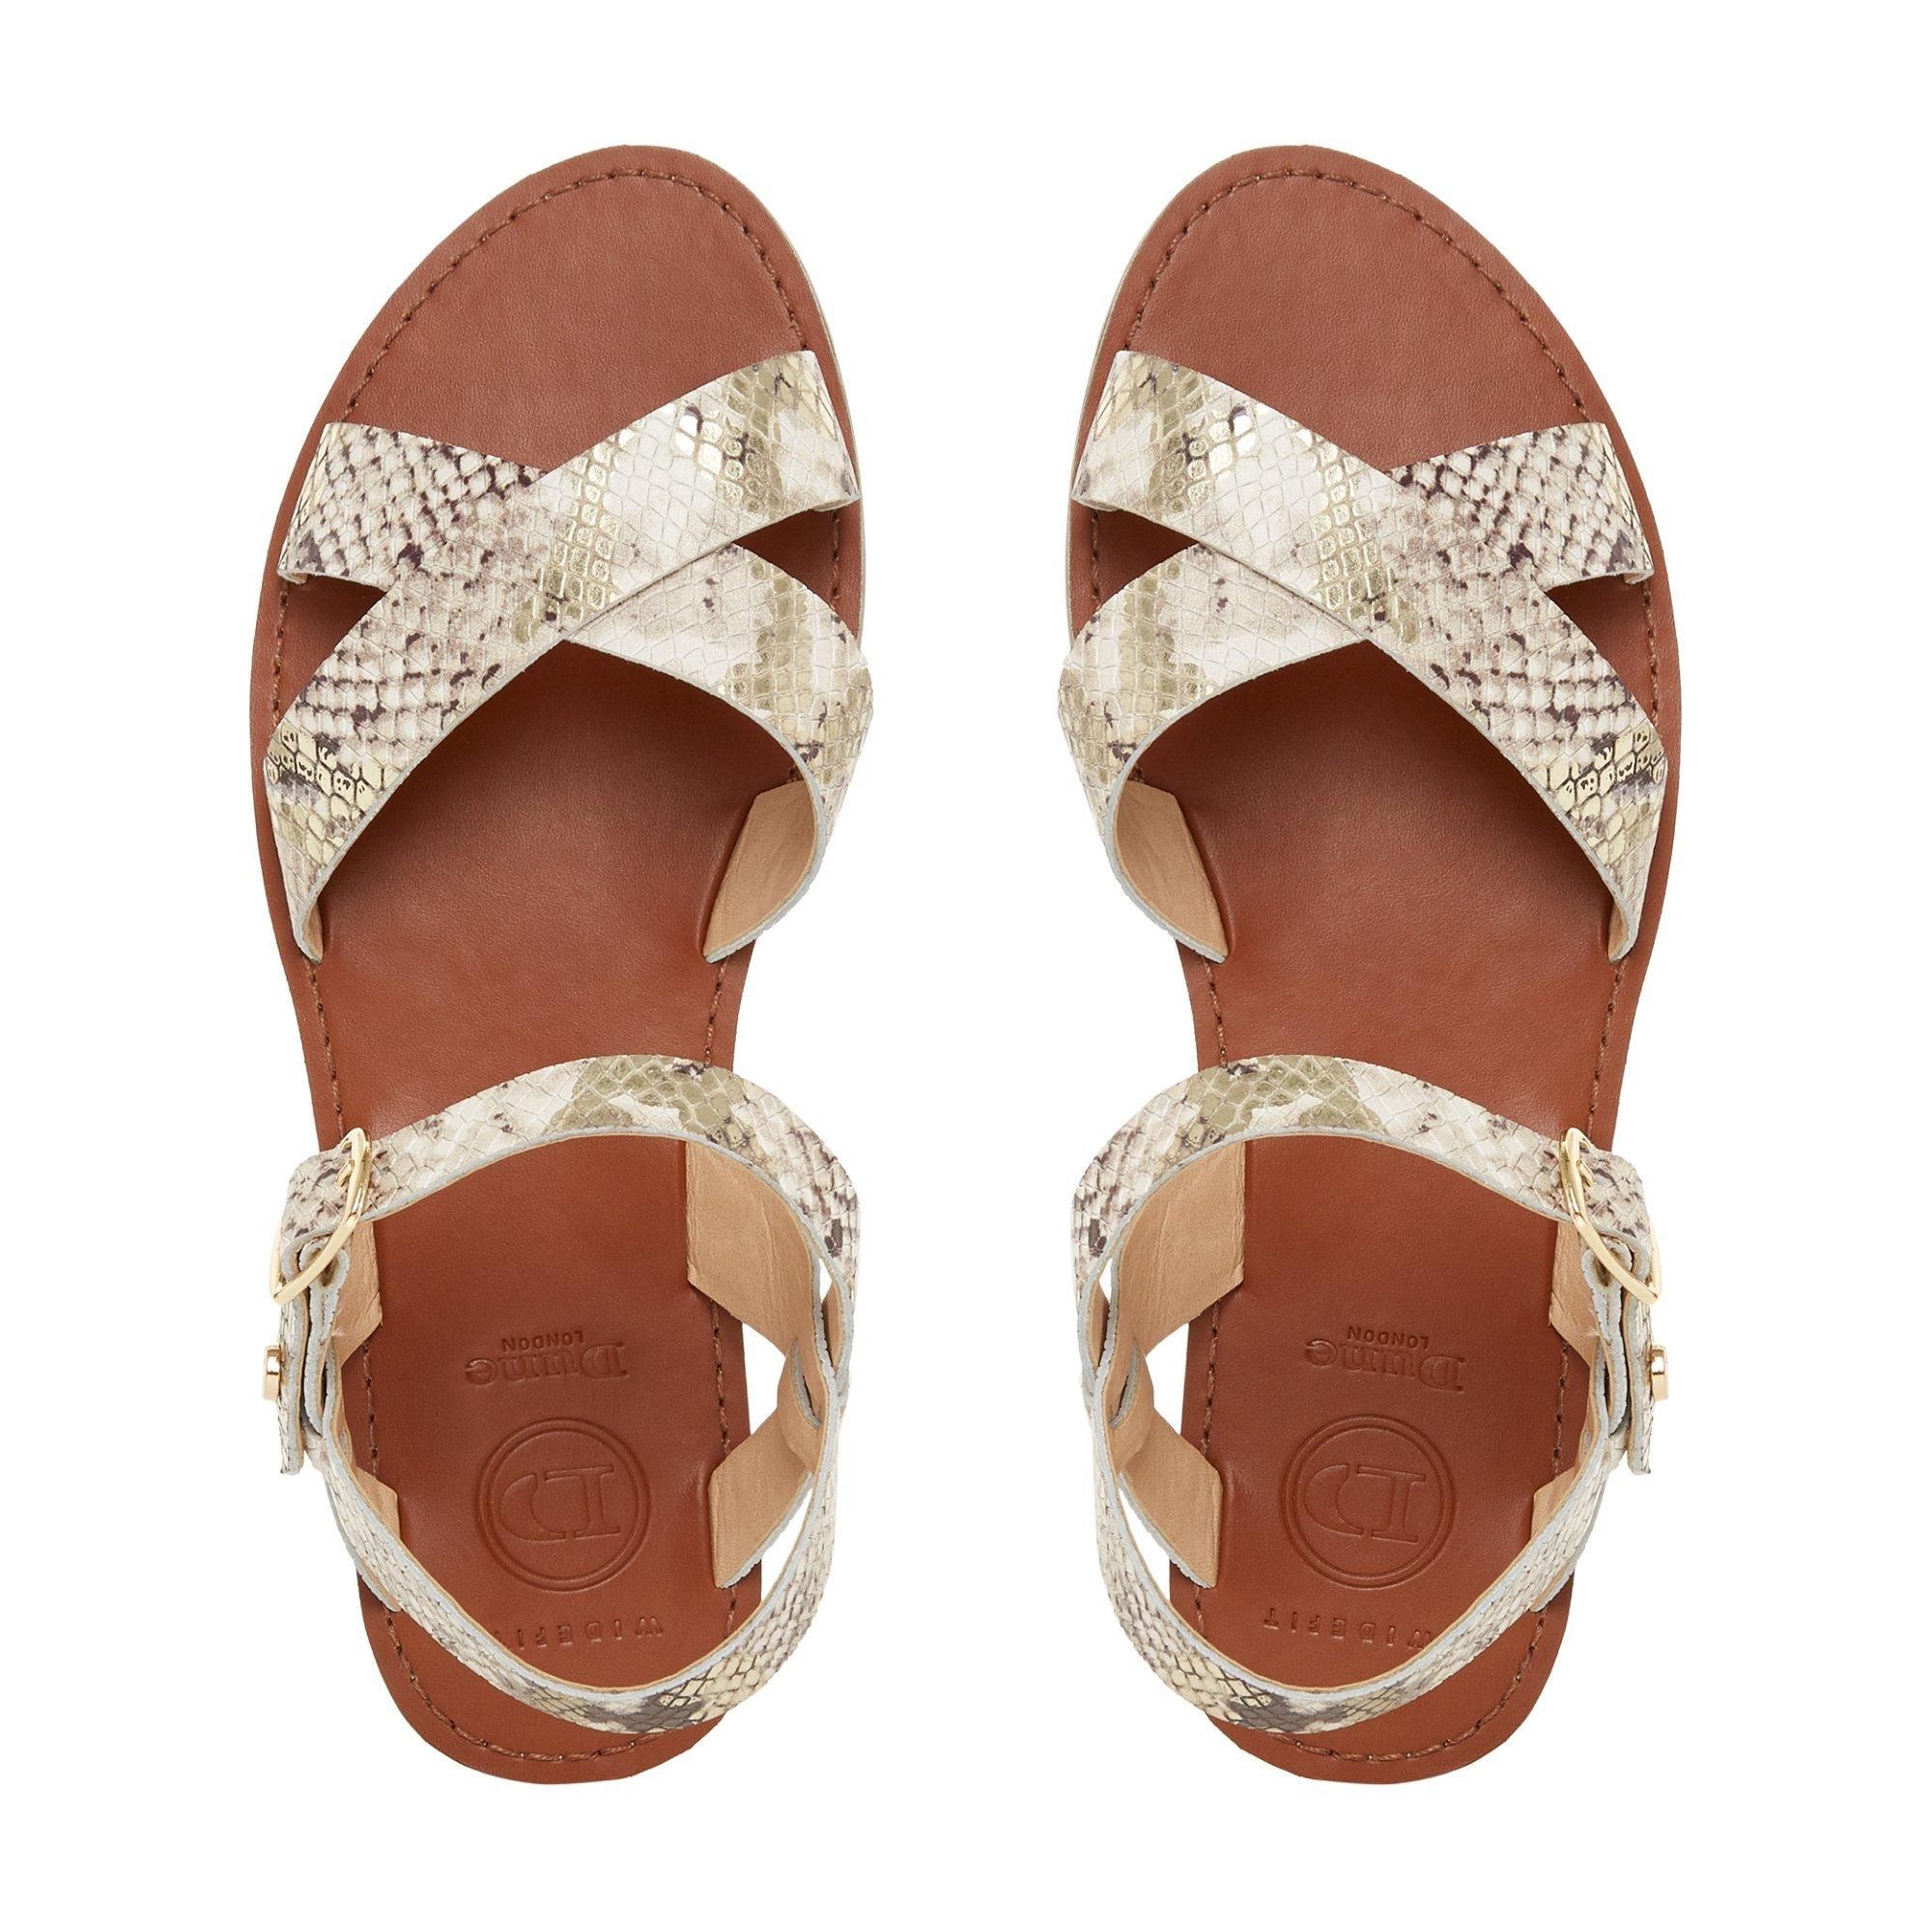 Upgrade your summer style with the WF Lavell sandal by Dune London. Designed with chic cross-over straps and a comfortable flat sole. It's complete with an ankle strap and gold-tone buckle fastening.